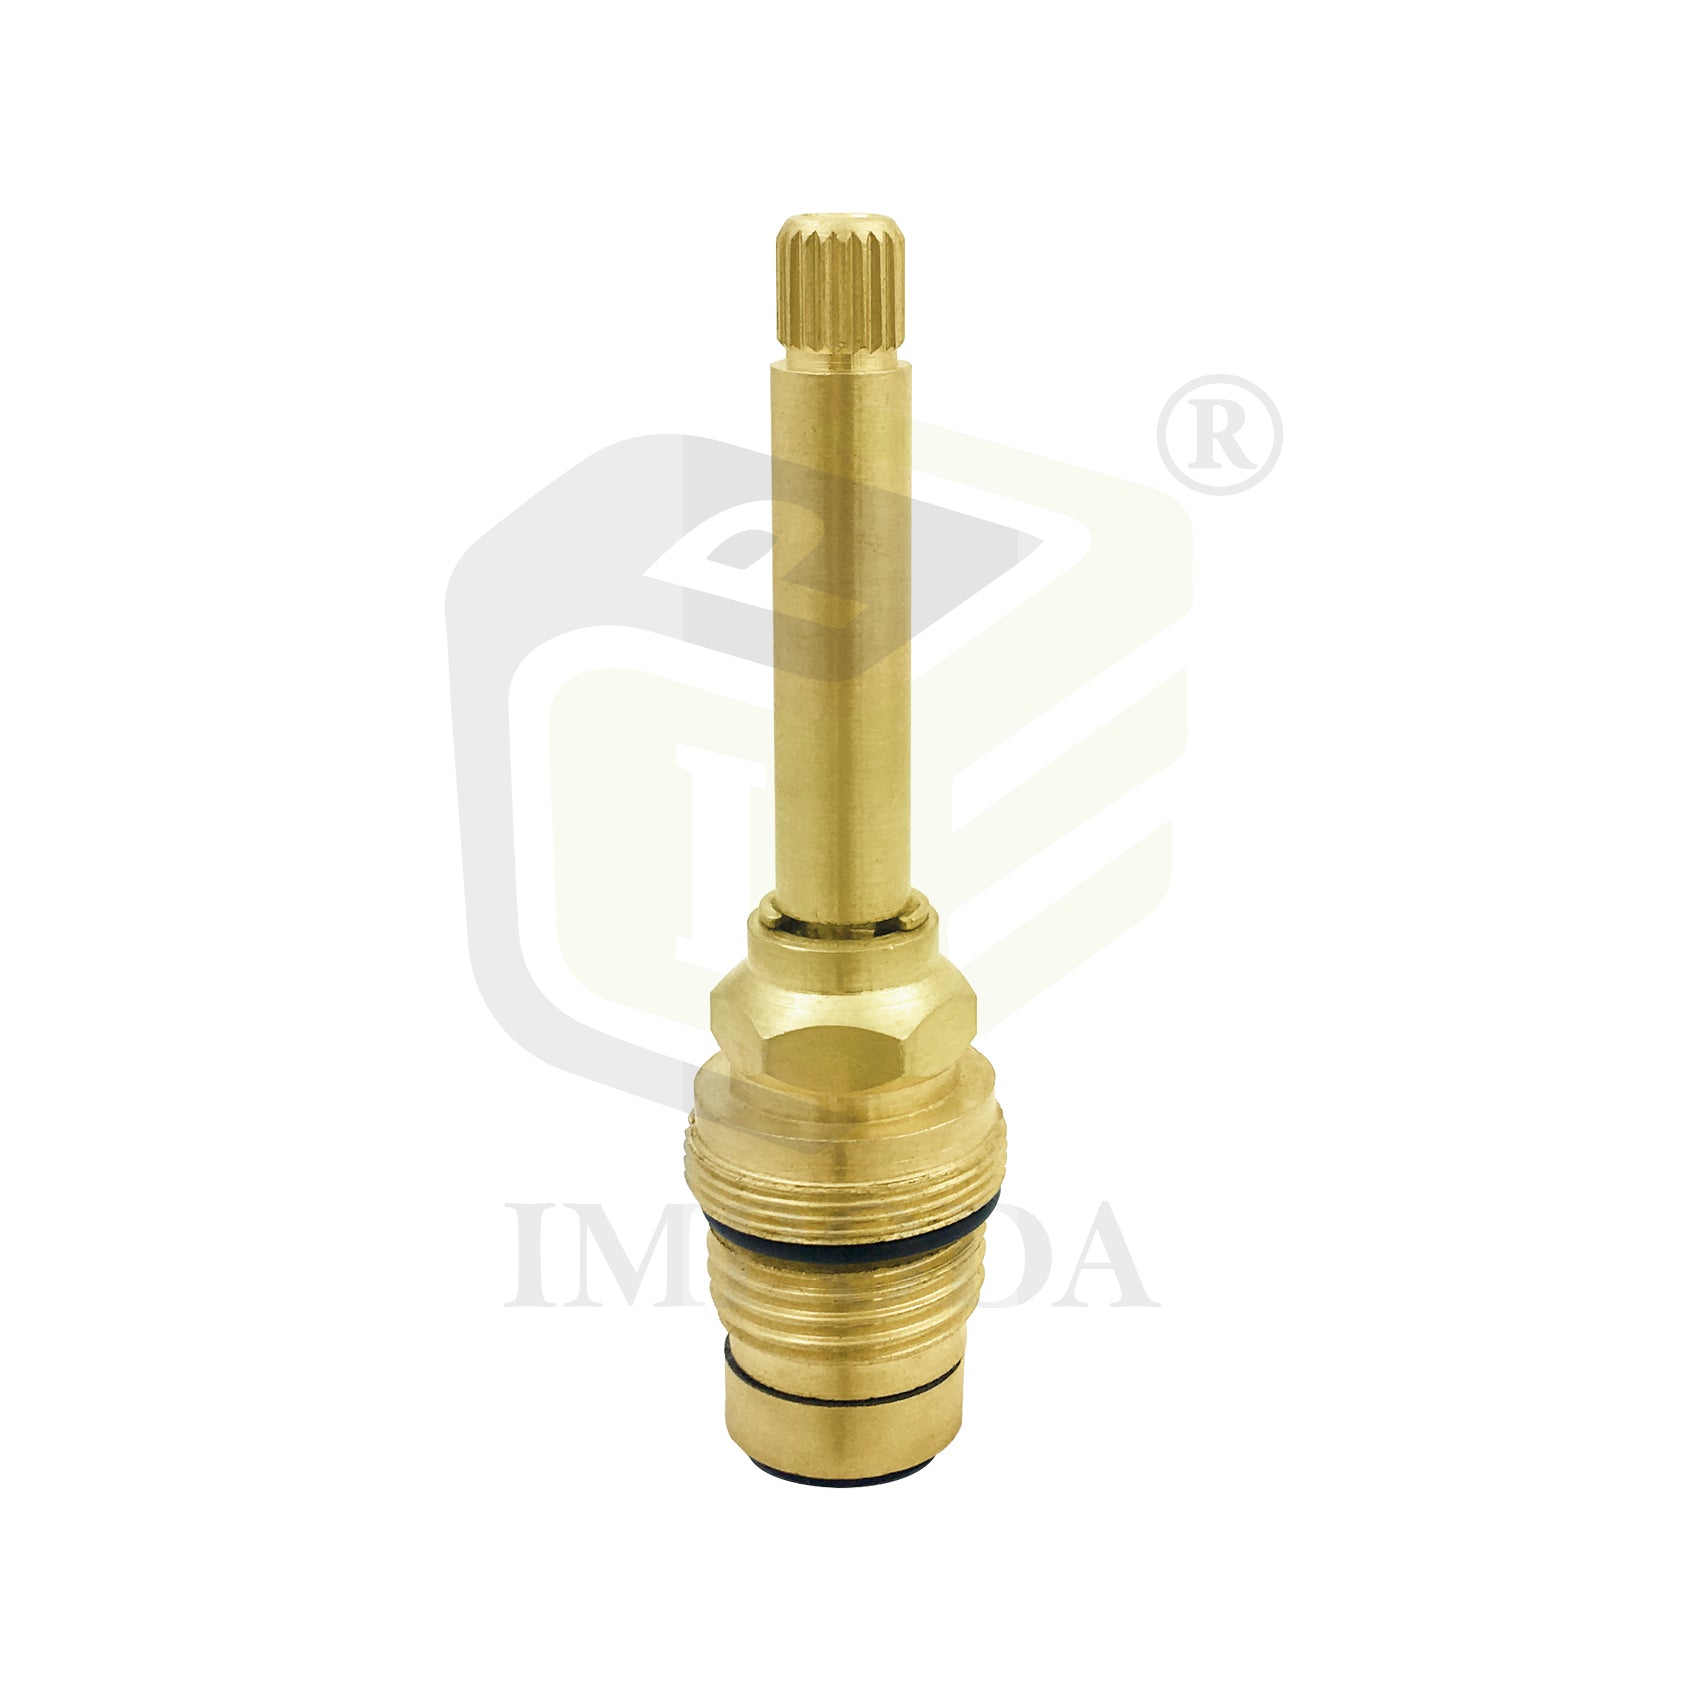 Plumber Type Nector Concealed Spindle Size 1/2"/IMP-1114